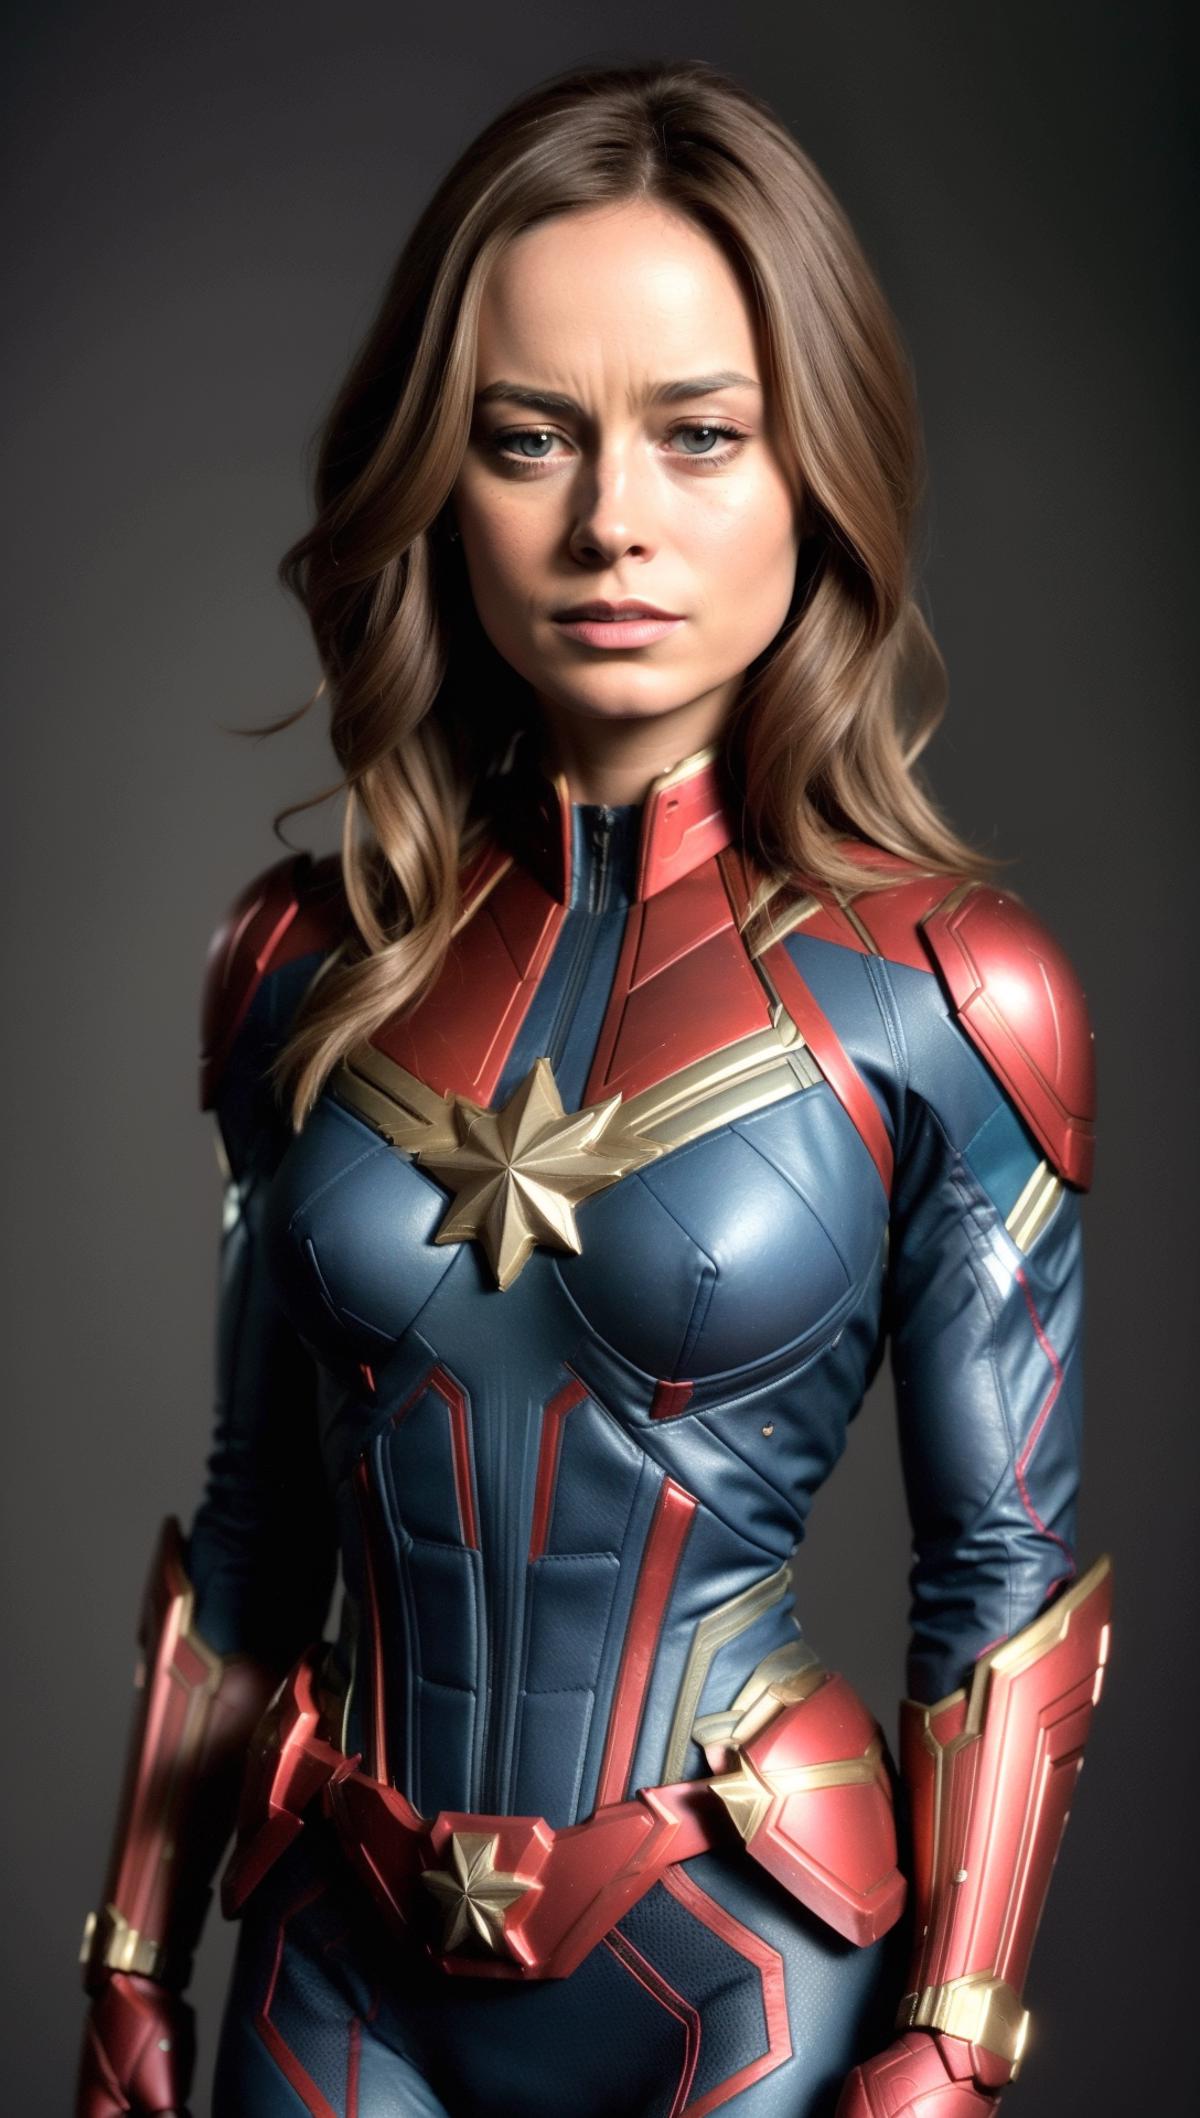 Brie Larson image by wlmsg